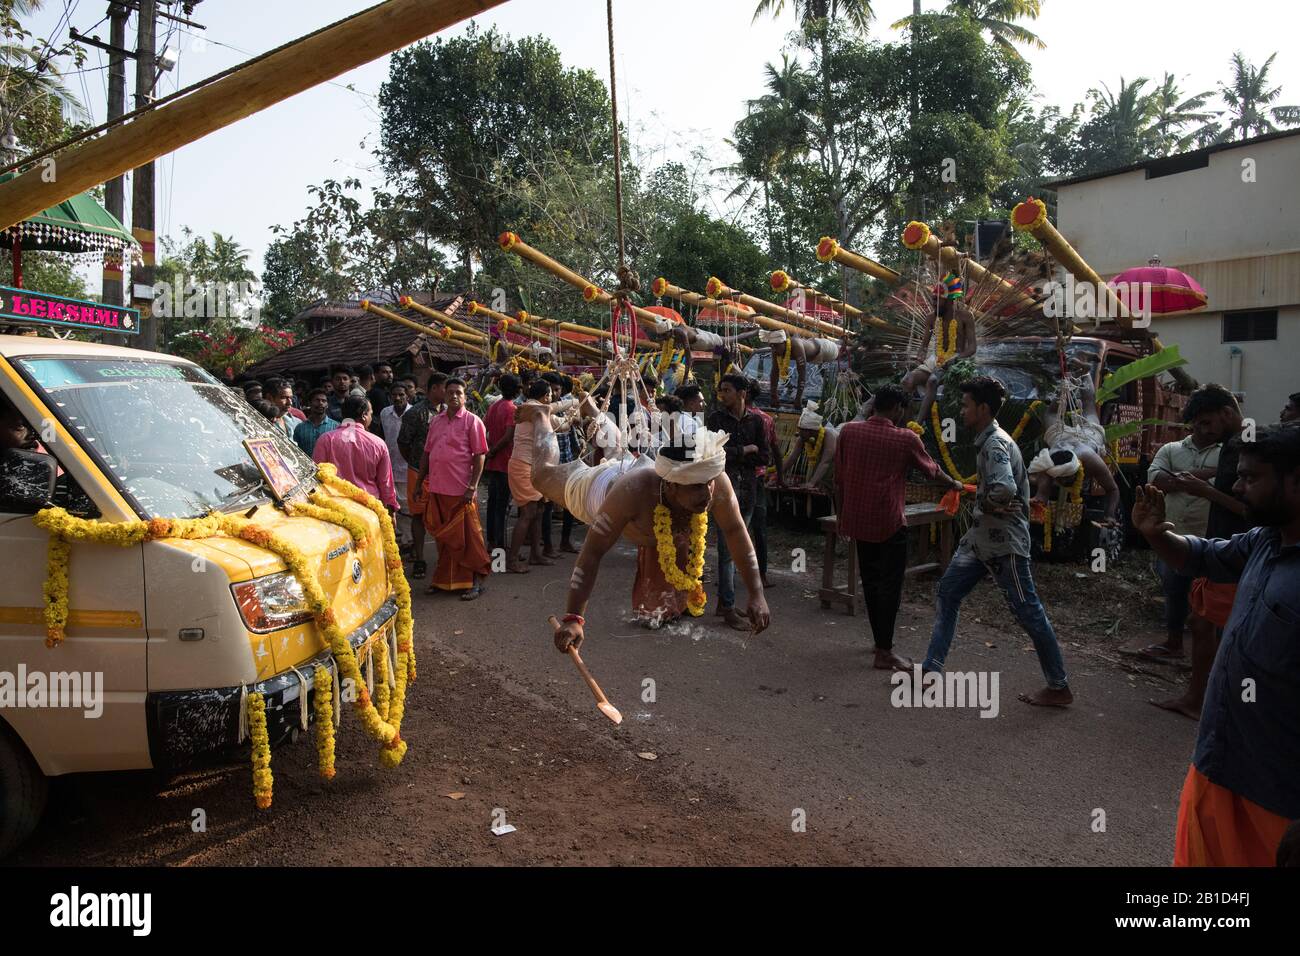 Devotees hanging by hooks piercing their skin as a ritualistic act of devotion, Garudan Thookkam (Eagle Hanging), during Thaipooyam, or Thaipoosam, Fe Stock Photo